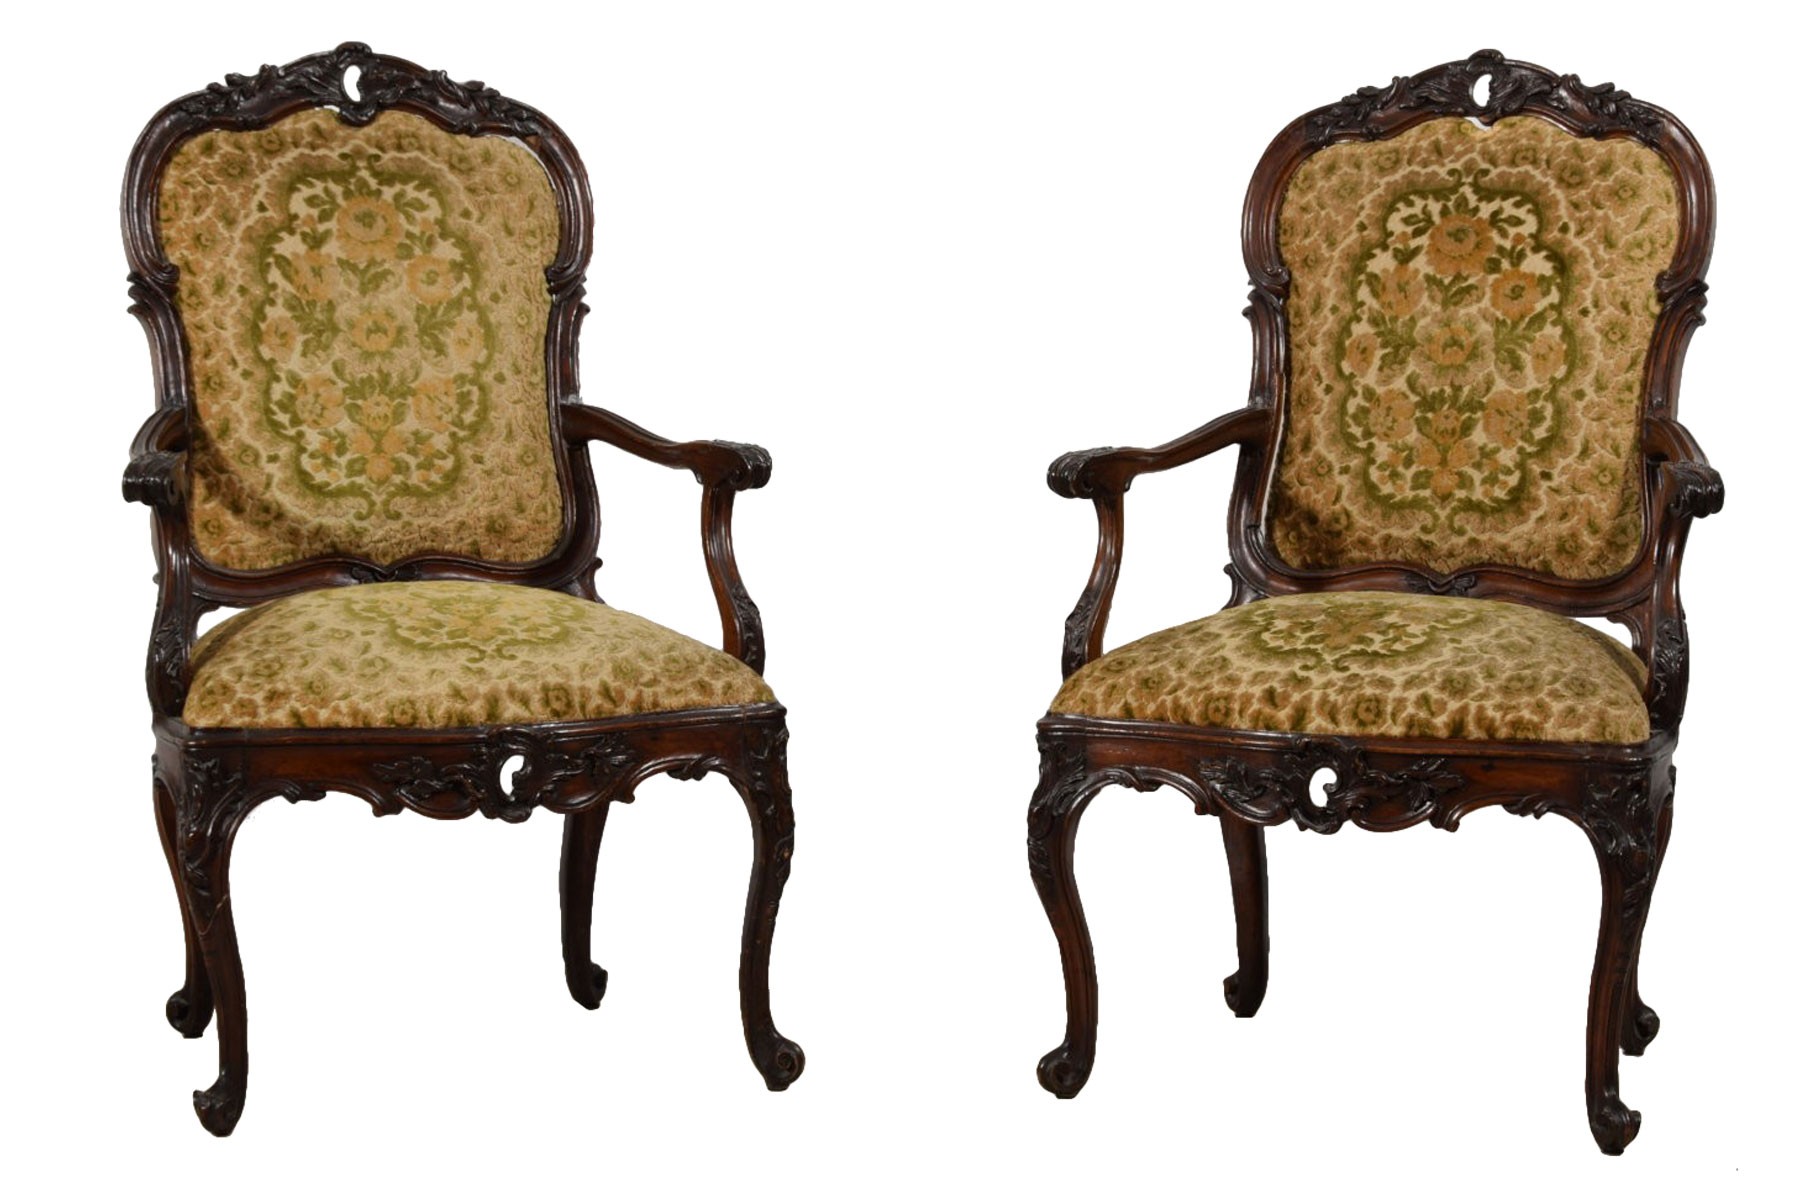 A Pair of Louis XV Style Carved wood arm chairs